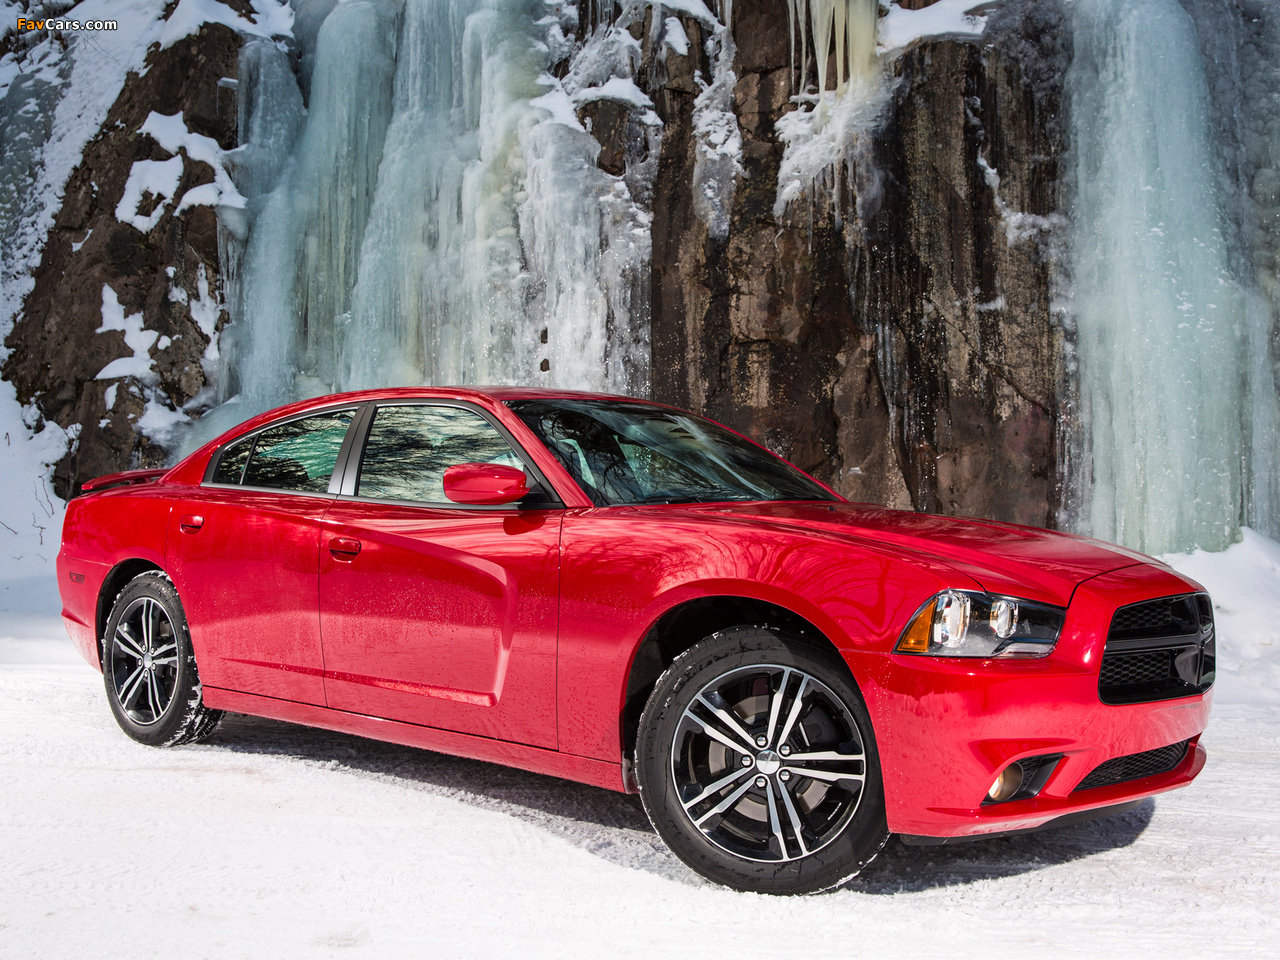 Dodge Charger AWD Sport 2013 pictures (1280 x 960)